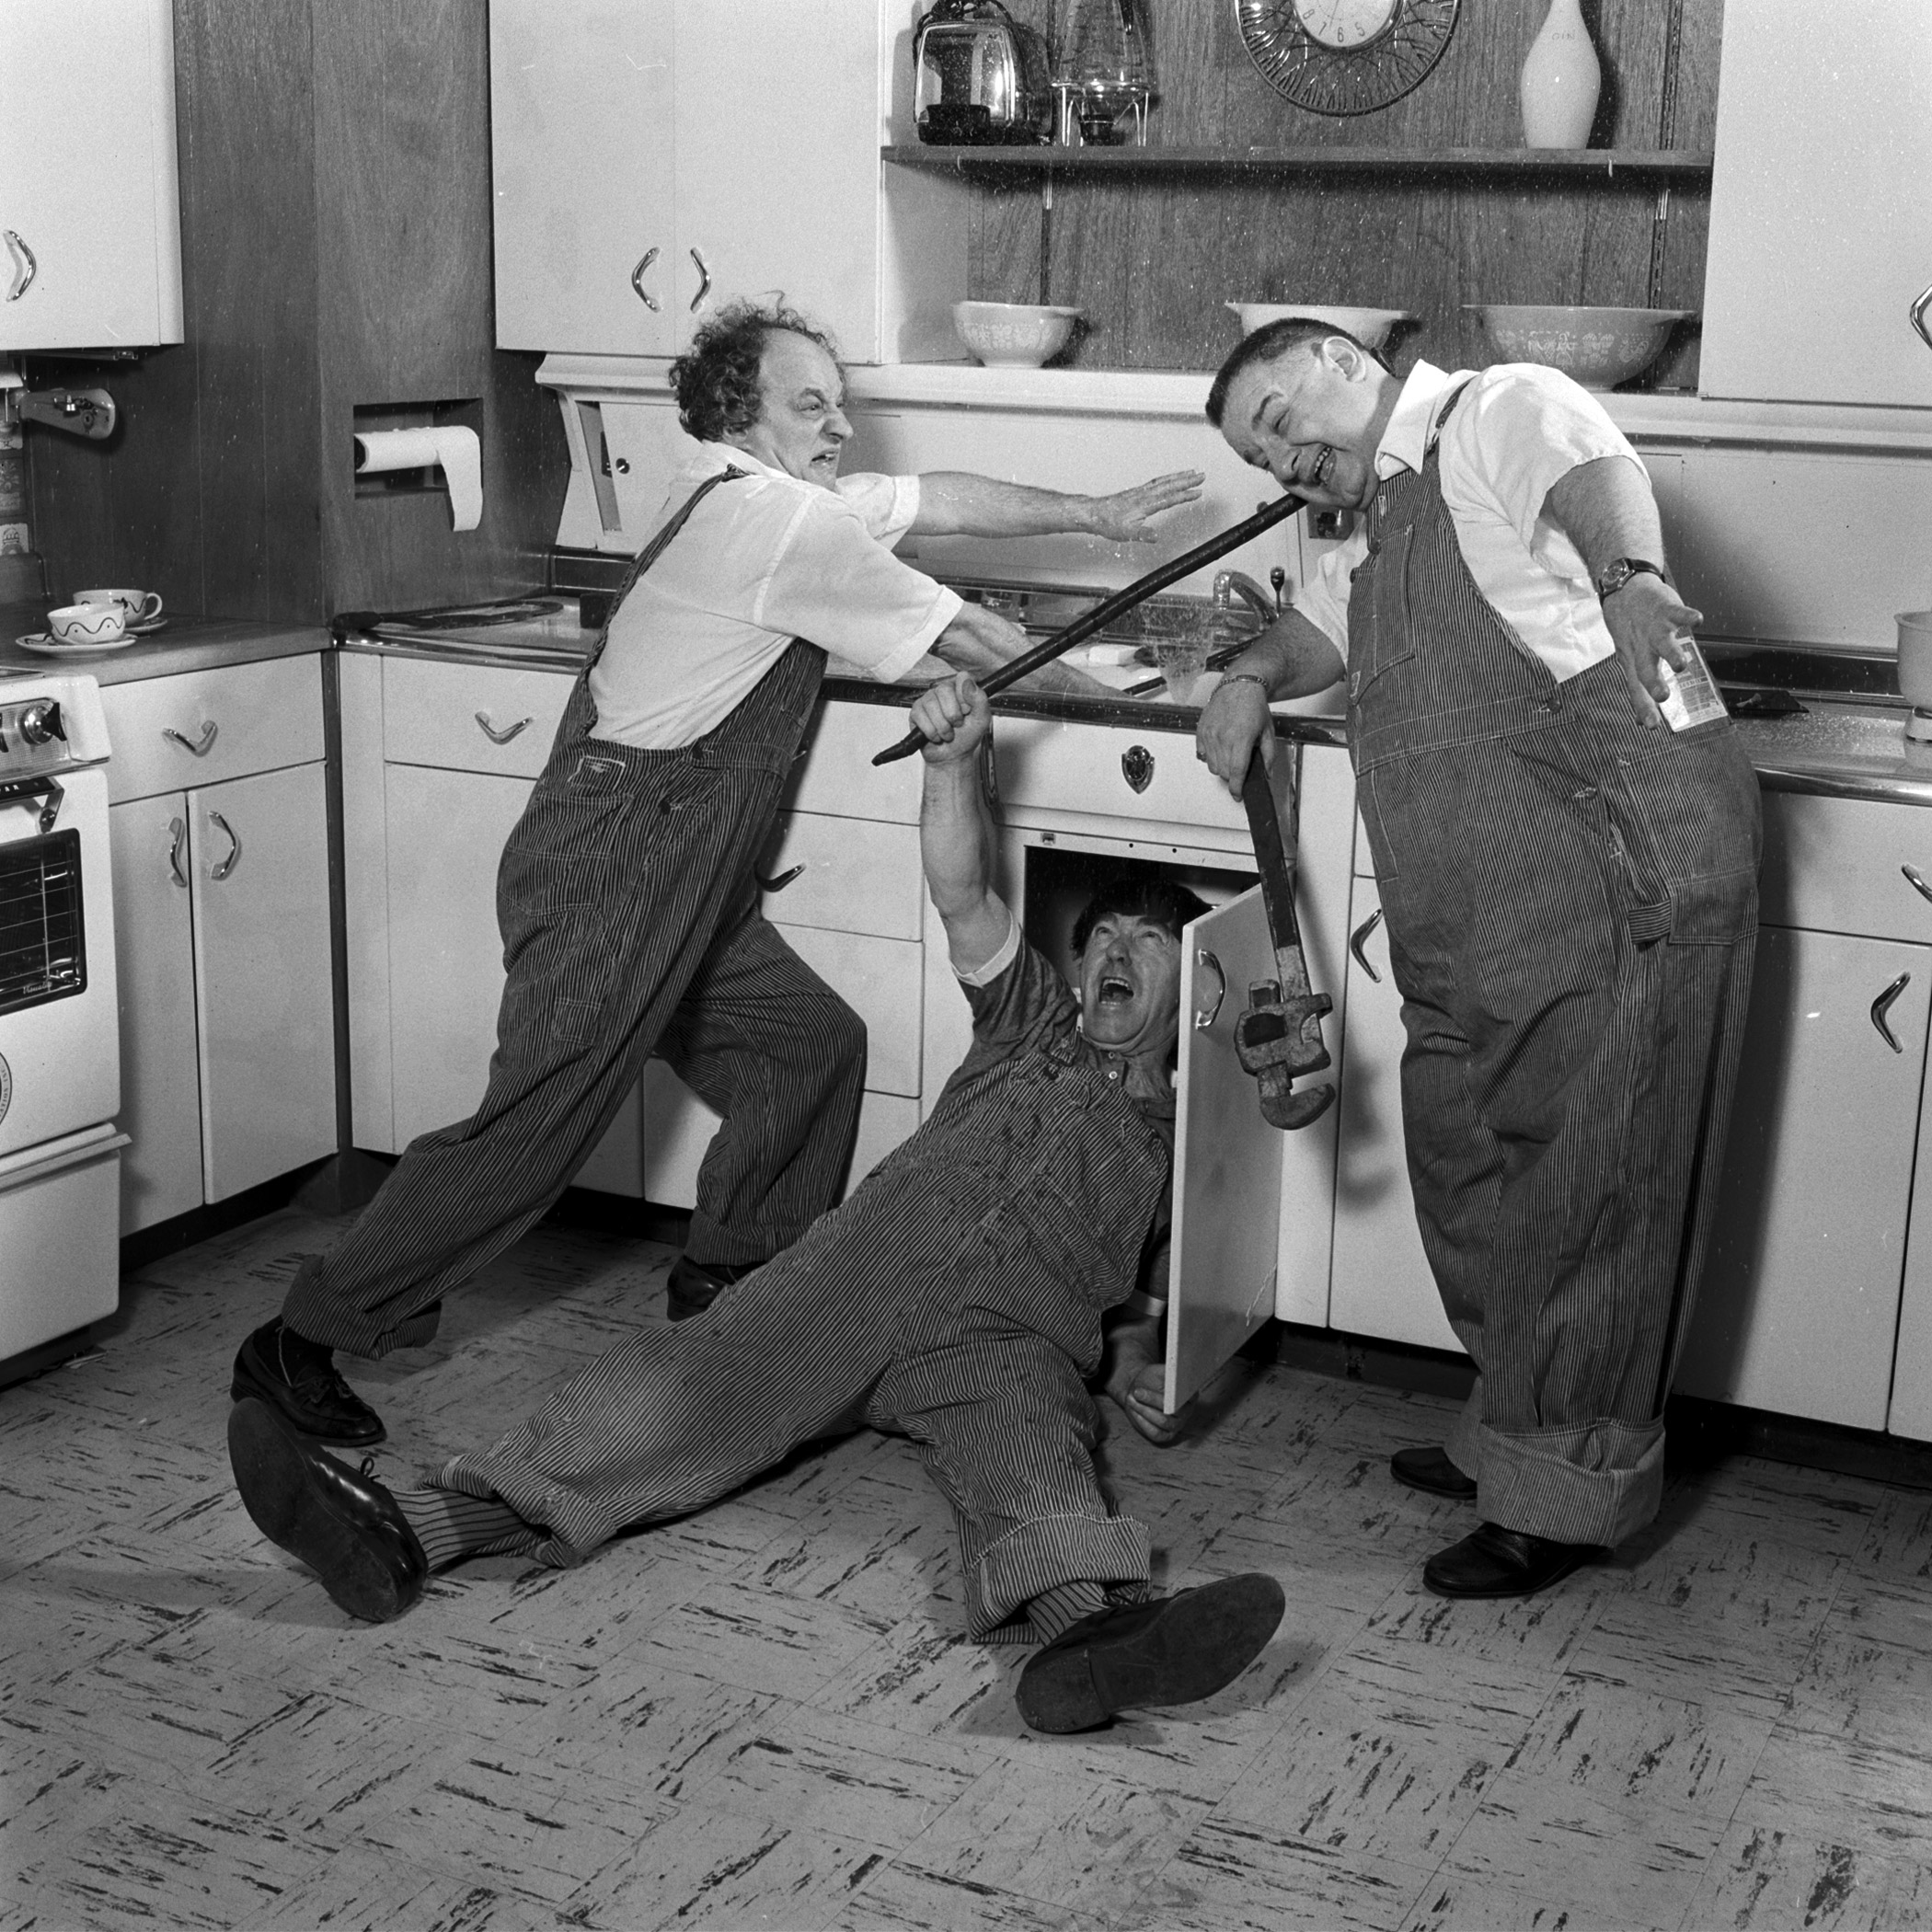 Three Stooges acting out a skit in May 1959.